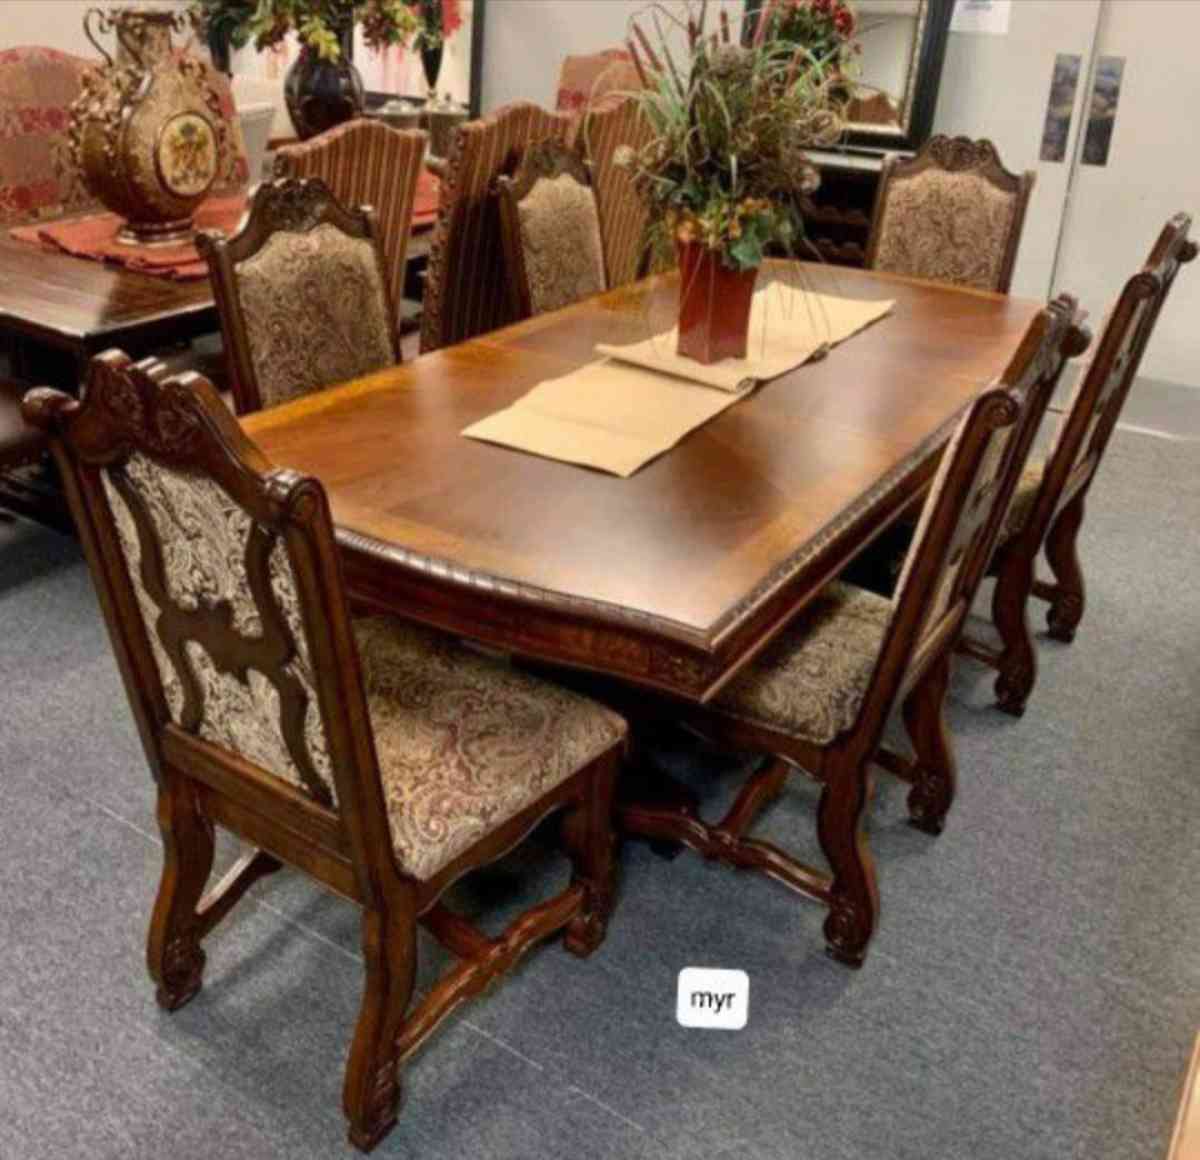 Brown formal extendable diningroom set table chairs comedor